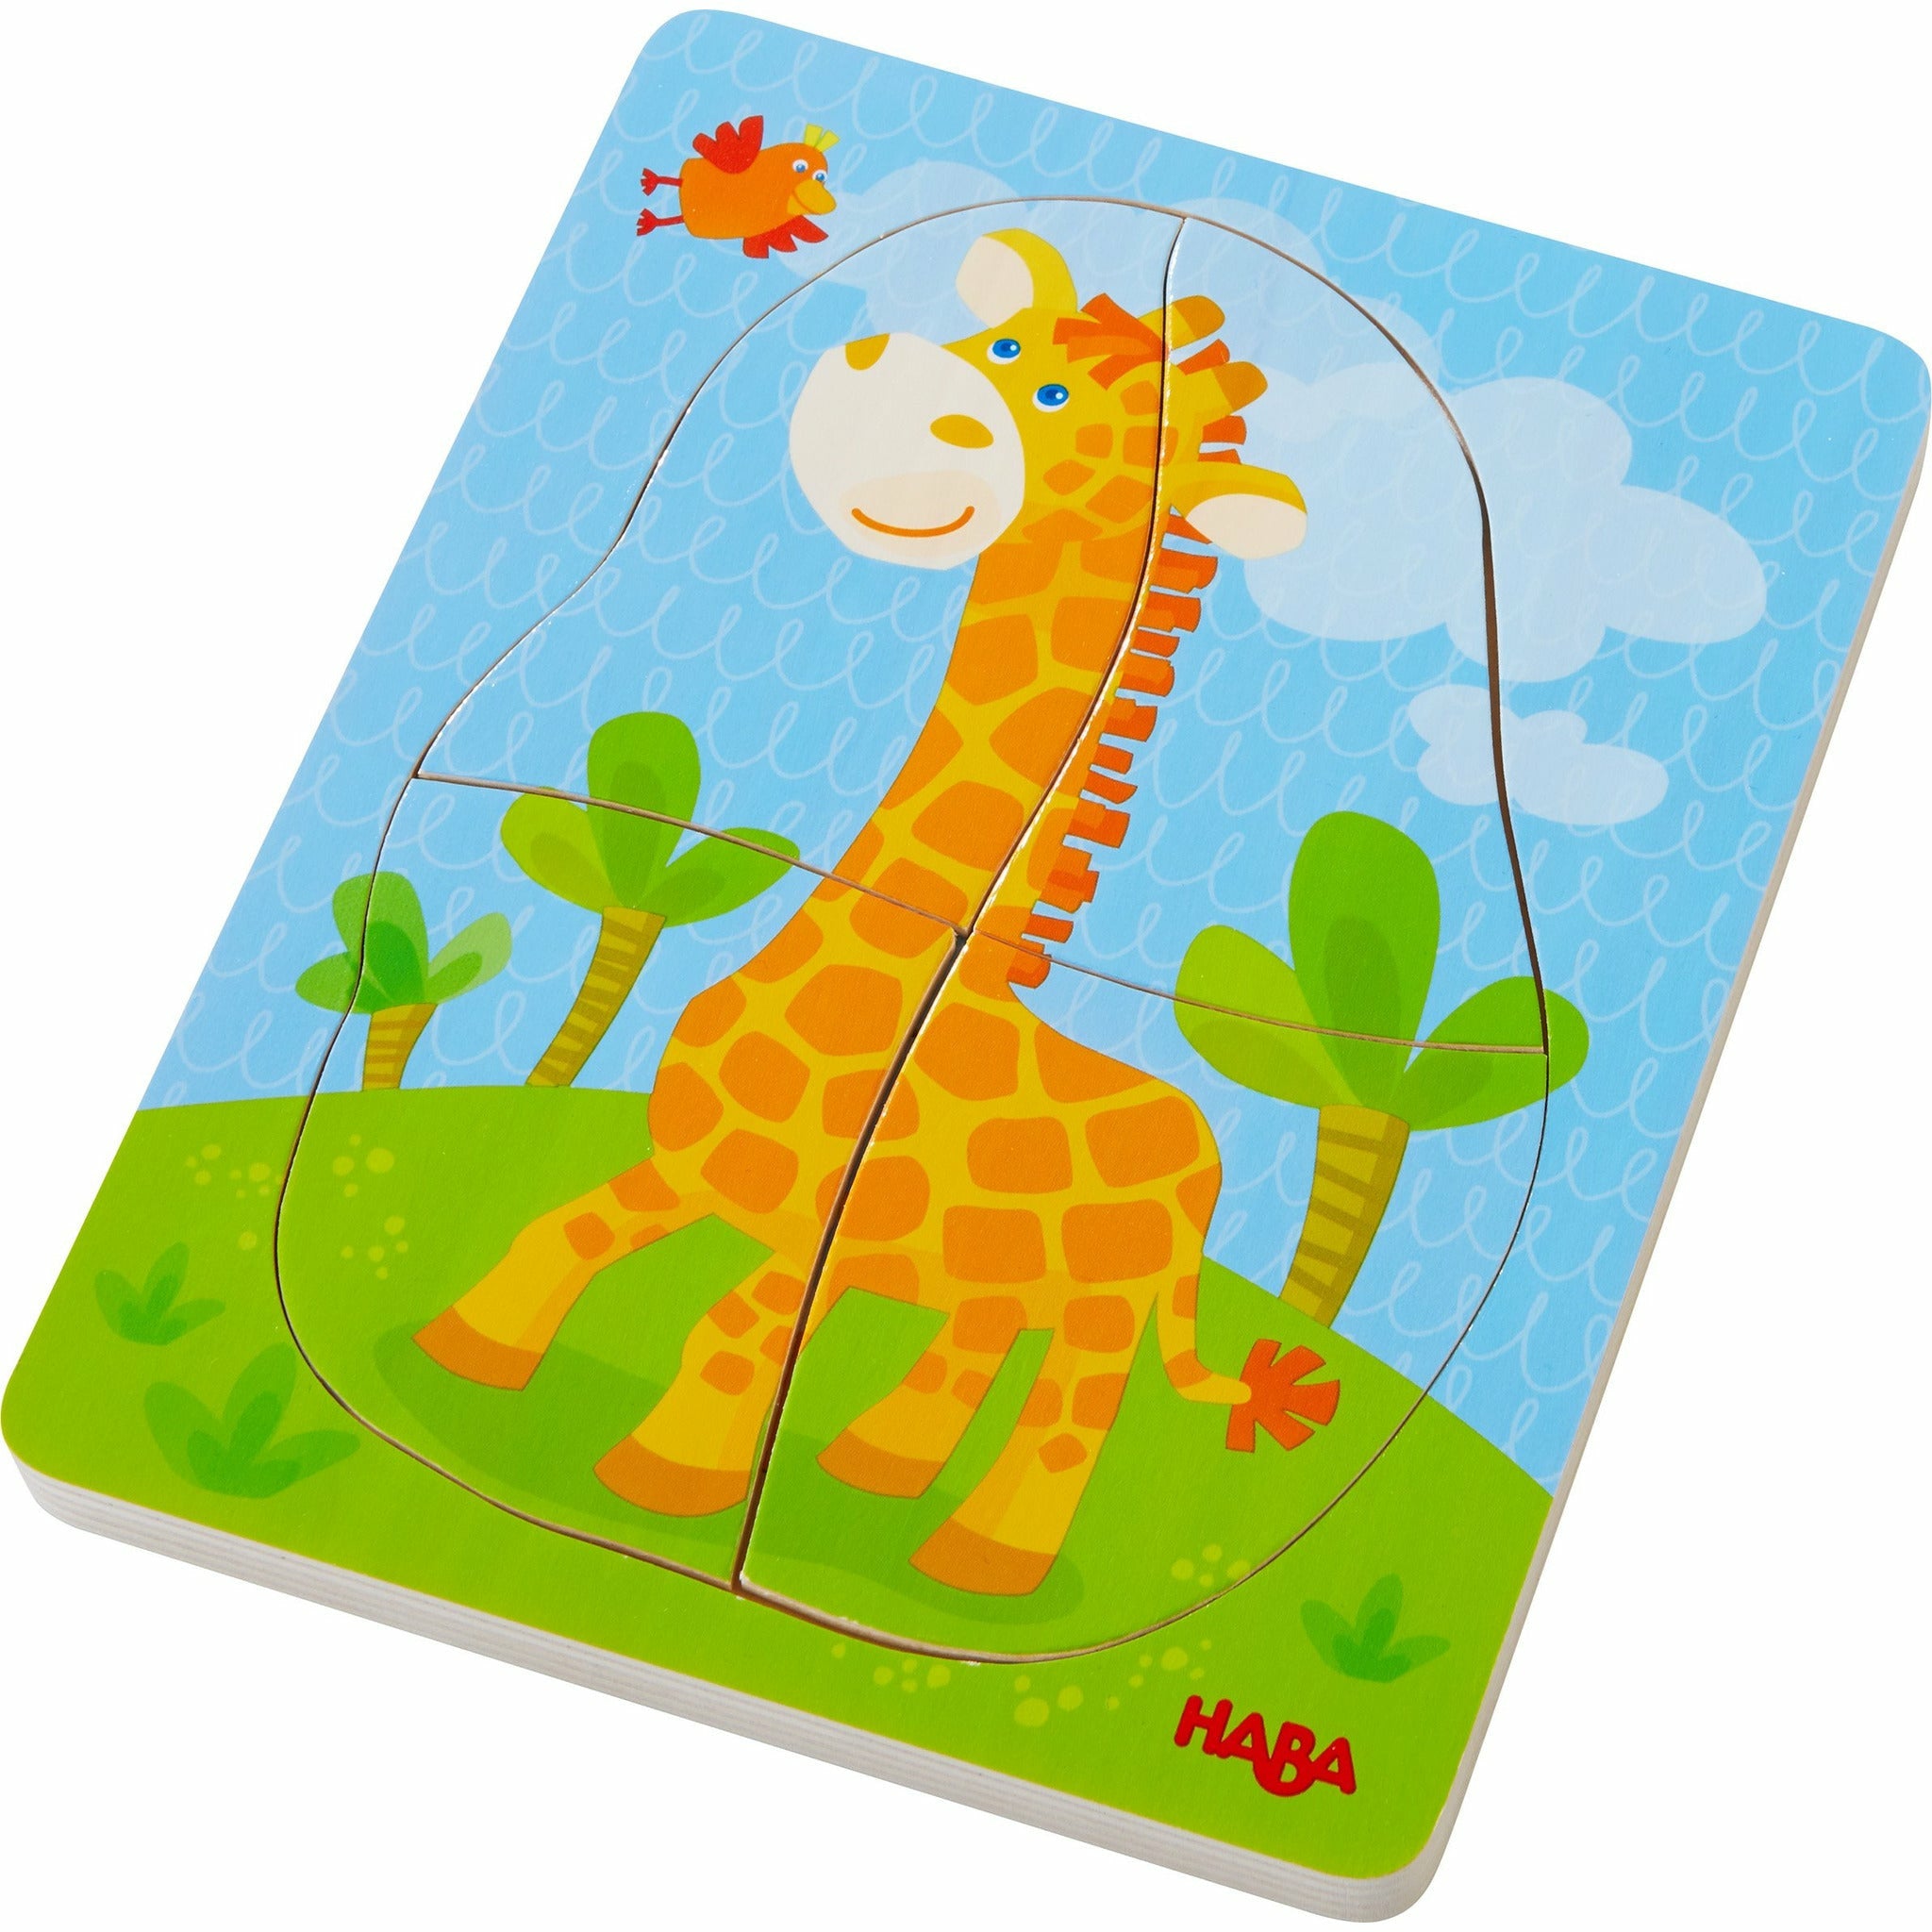 HABA | Holzpuzzle Wildtiere